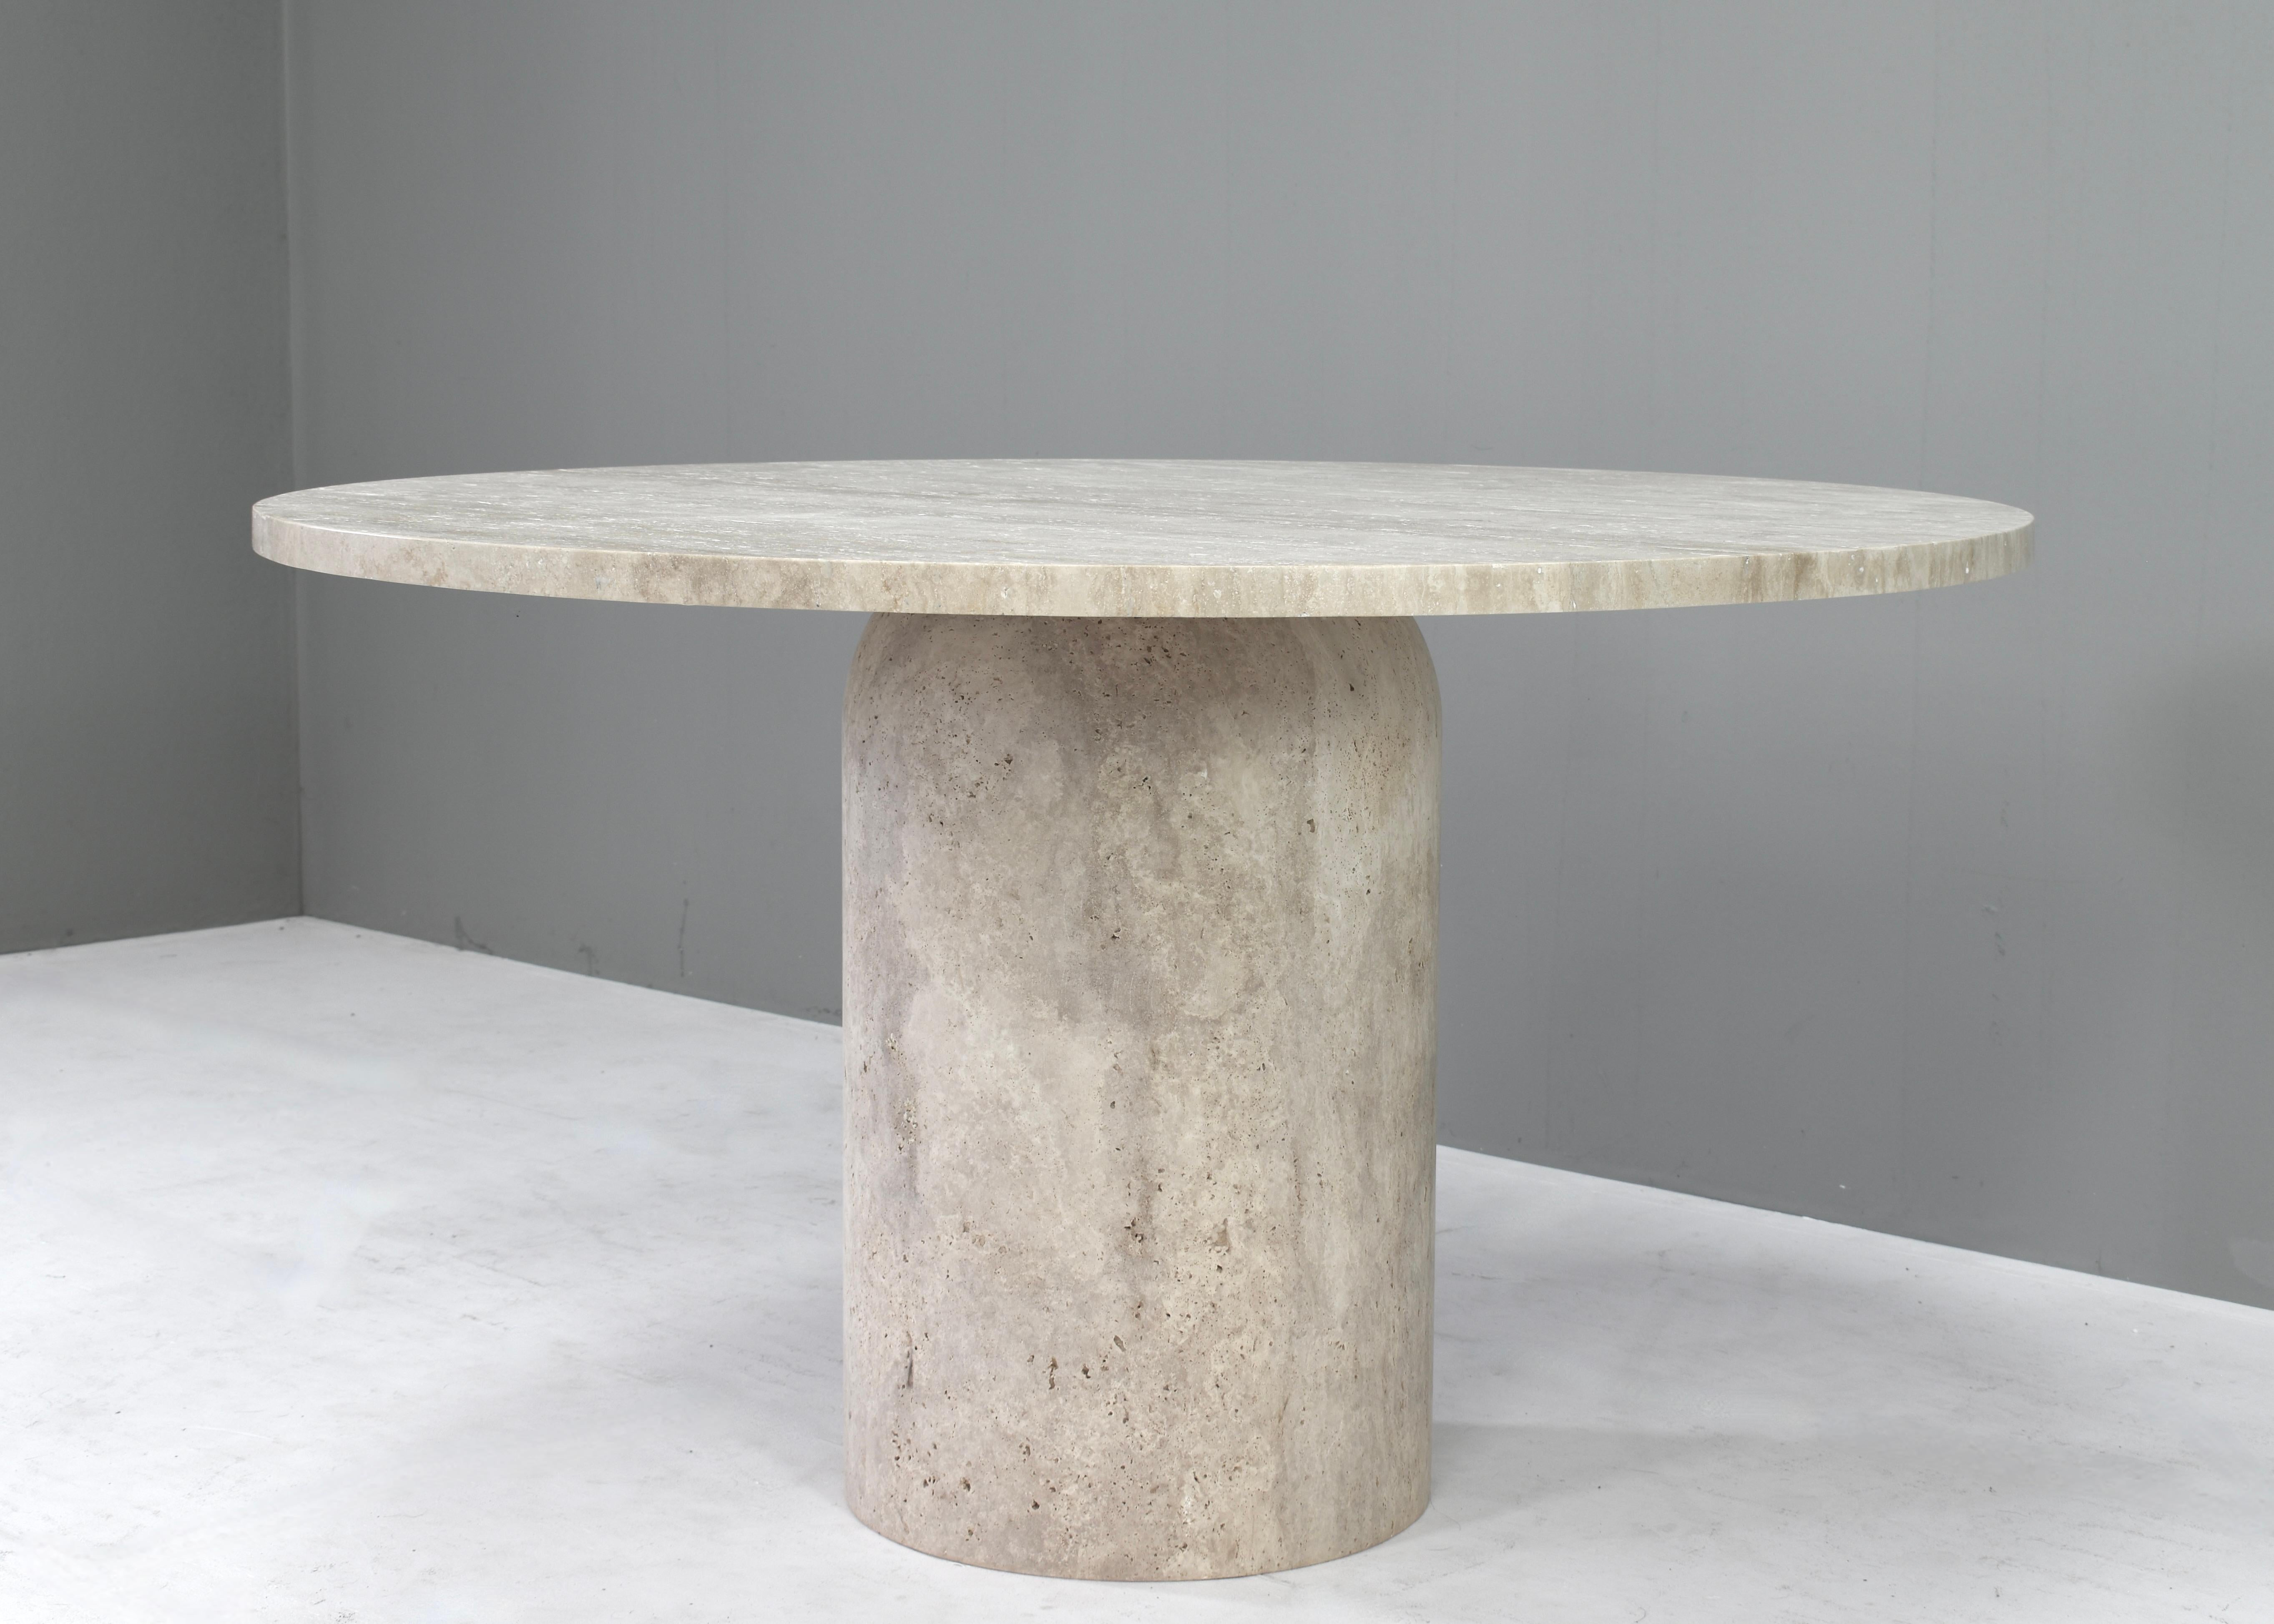 Introducing this exquisite Round Travertine Dining Table – Elegance in the Manor of Up&Up, Angelo Mangiarotti and Kelly Wearstler.
The table will be made to order so the ordered table may differ from the pictures.
Designer: in the manor of Kelly